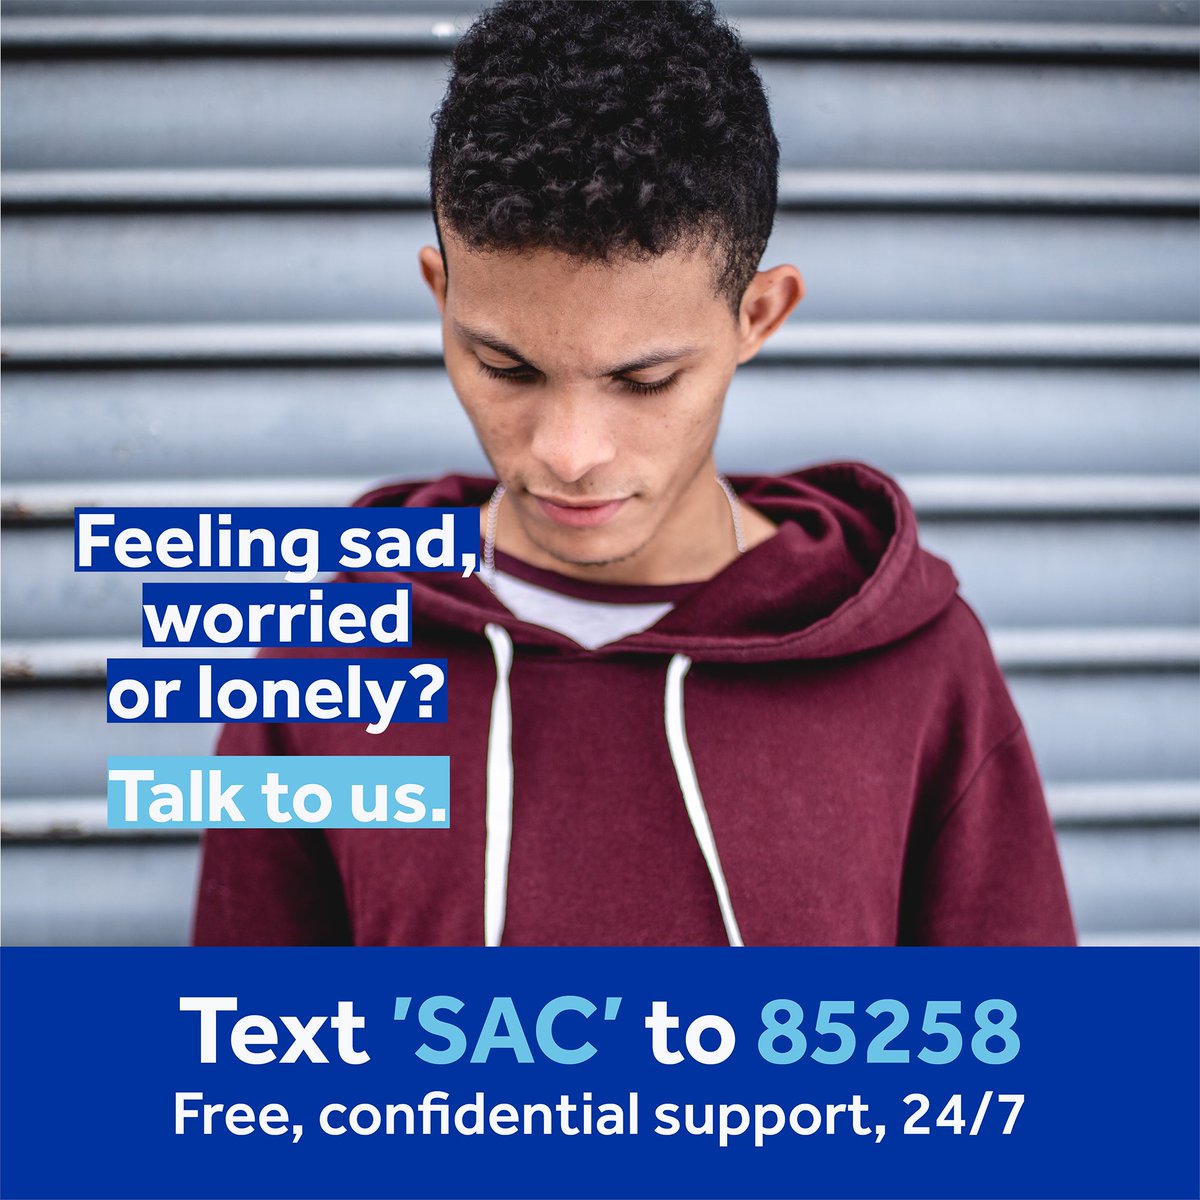 We're proud to partner with Shout to offer free, confidential mental health support to anyone in distress. To use the service, simply text SAC to 85258. Shout’s trained volunteers can help with issues including anxiety, stress, loneliness or depression and are available 24/7.